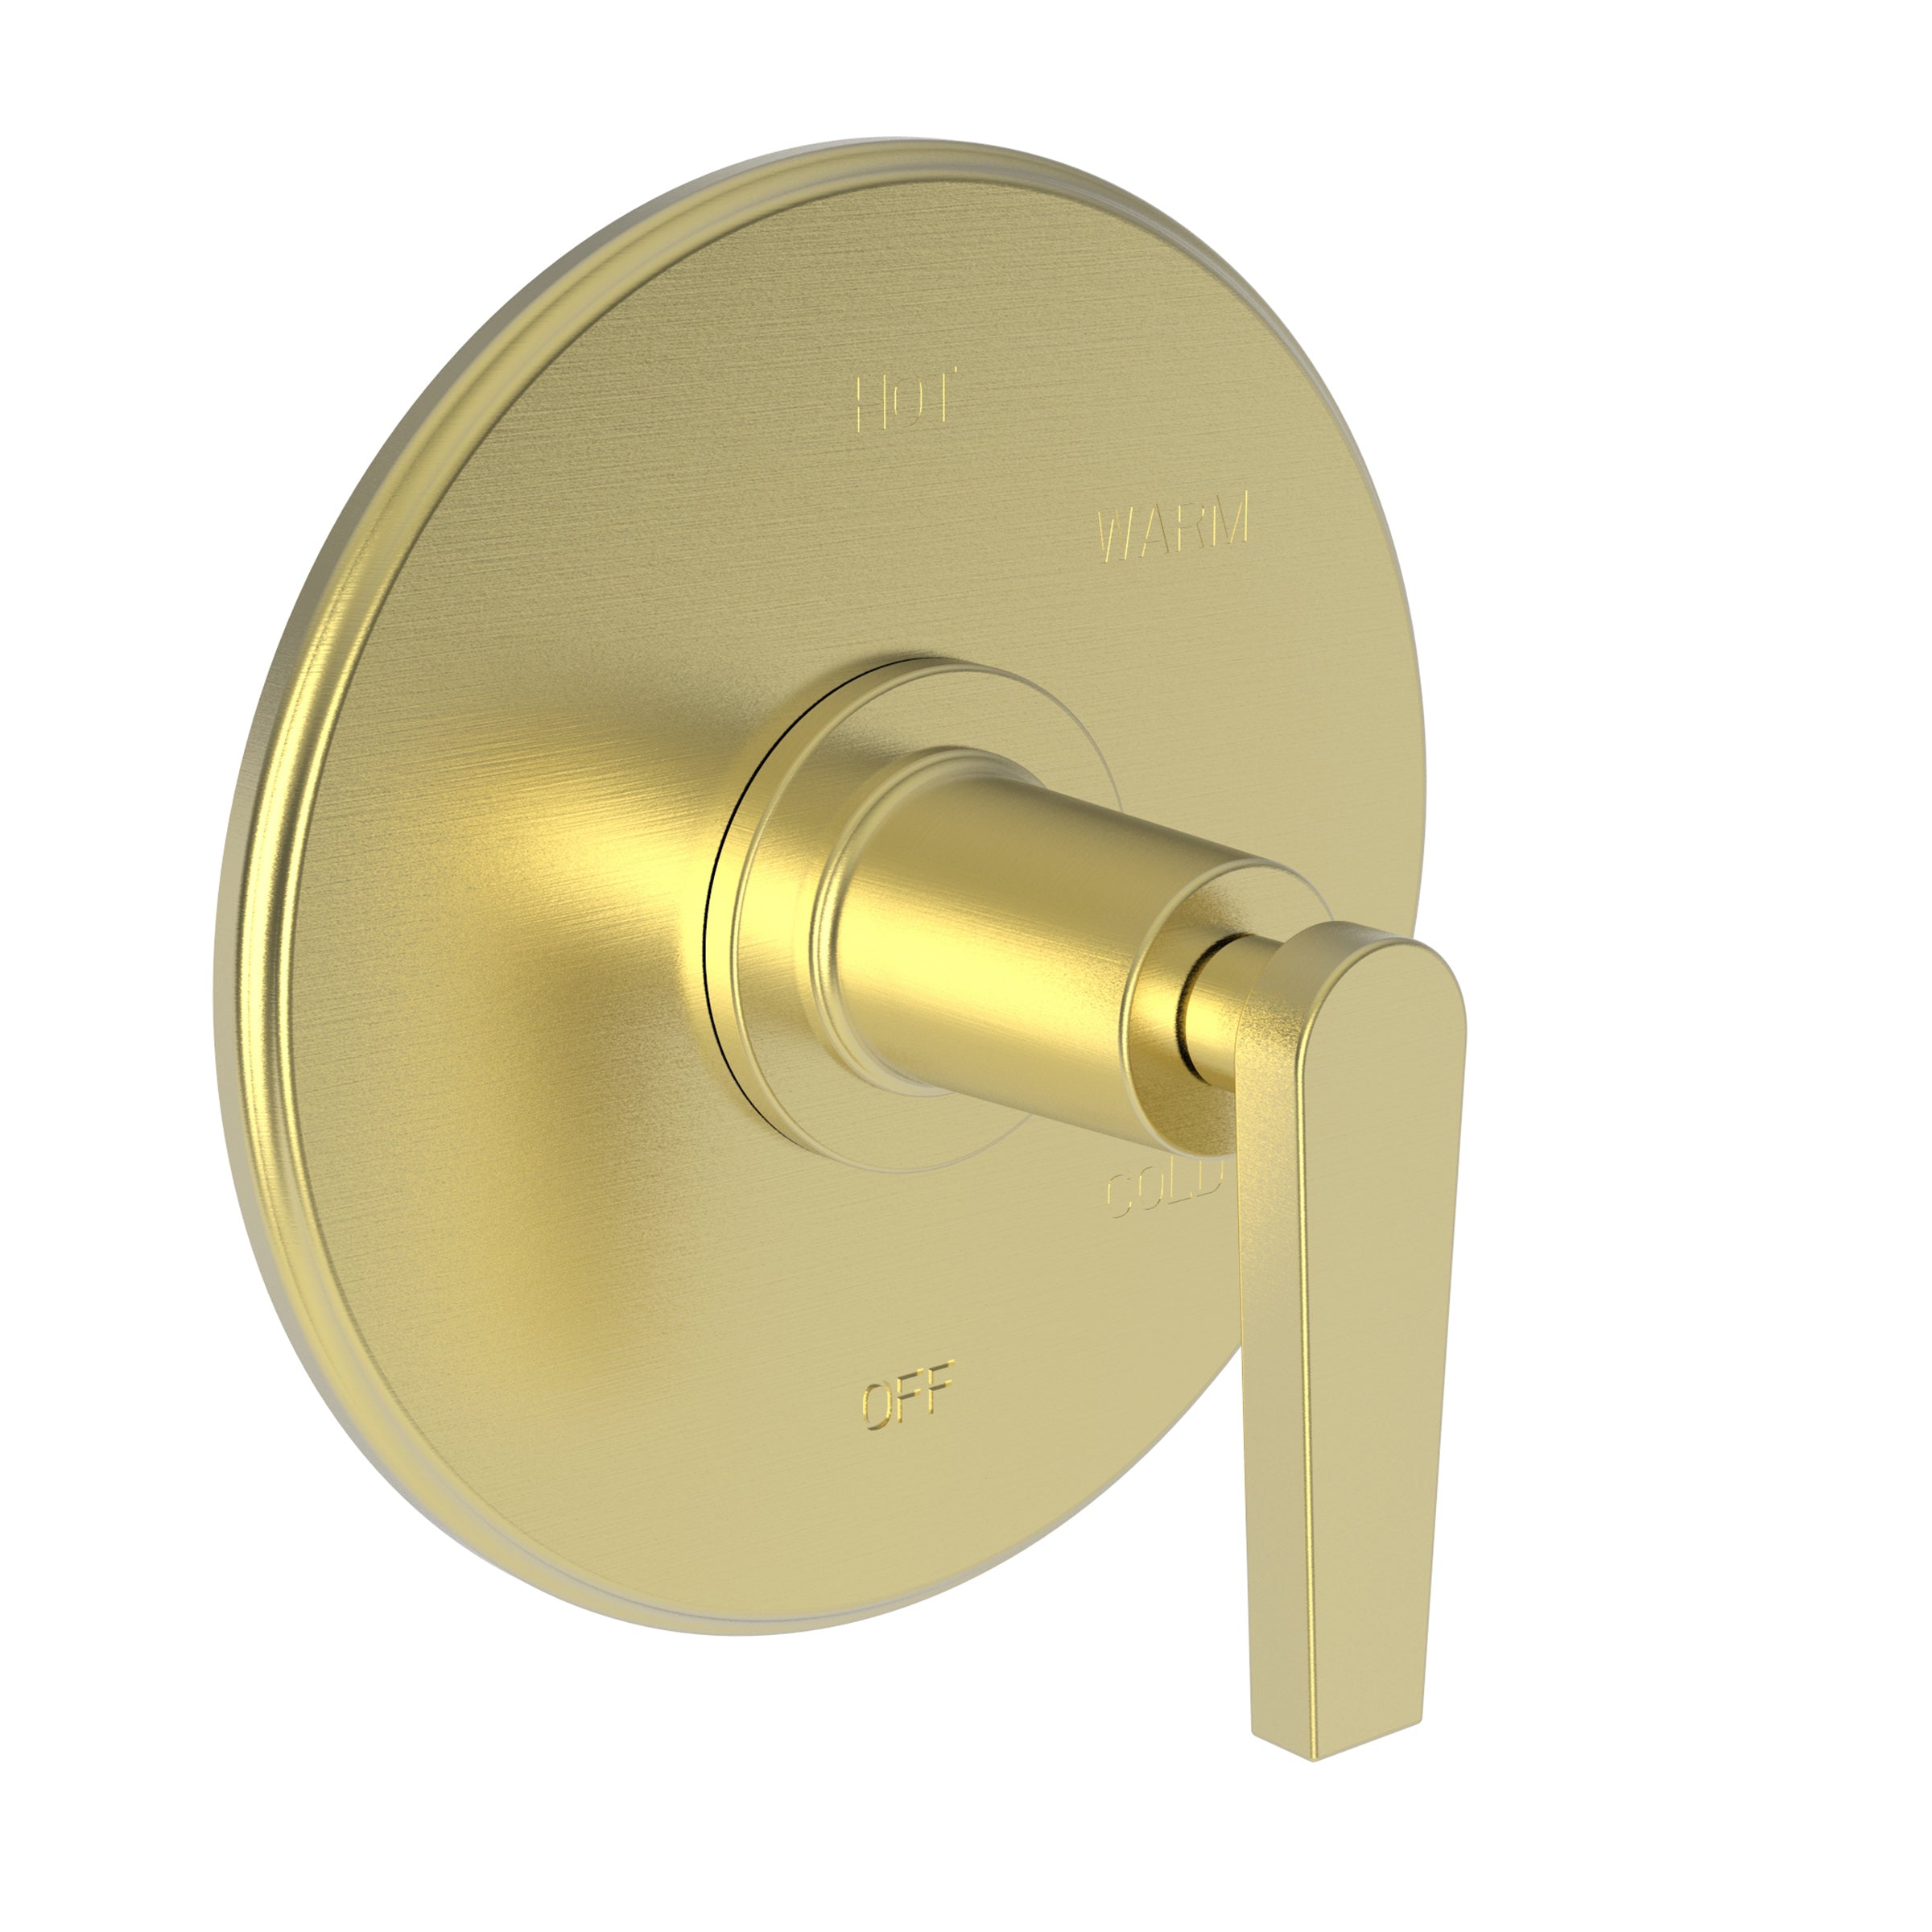 Newport Brass Dorrance Balanced Pressure Shower Trim Plate with Handle. Less showerhead, arm and flange.